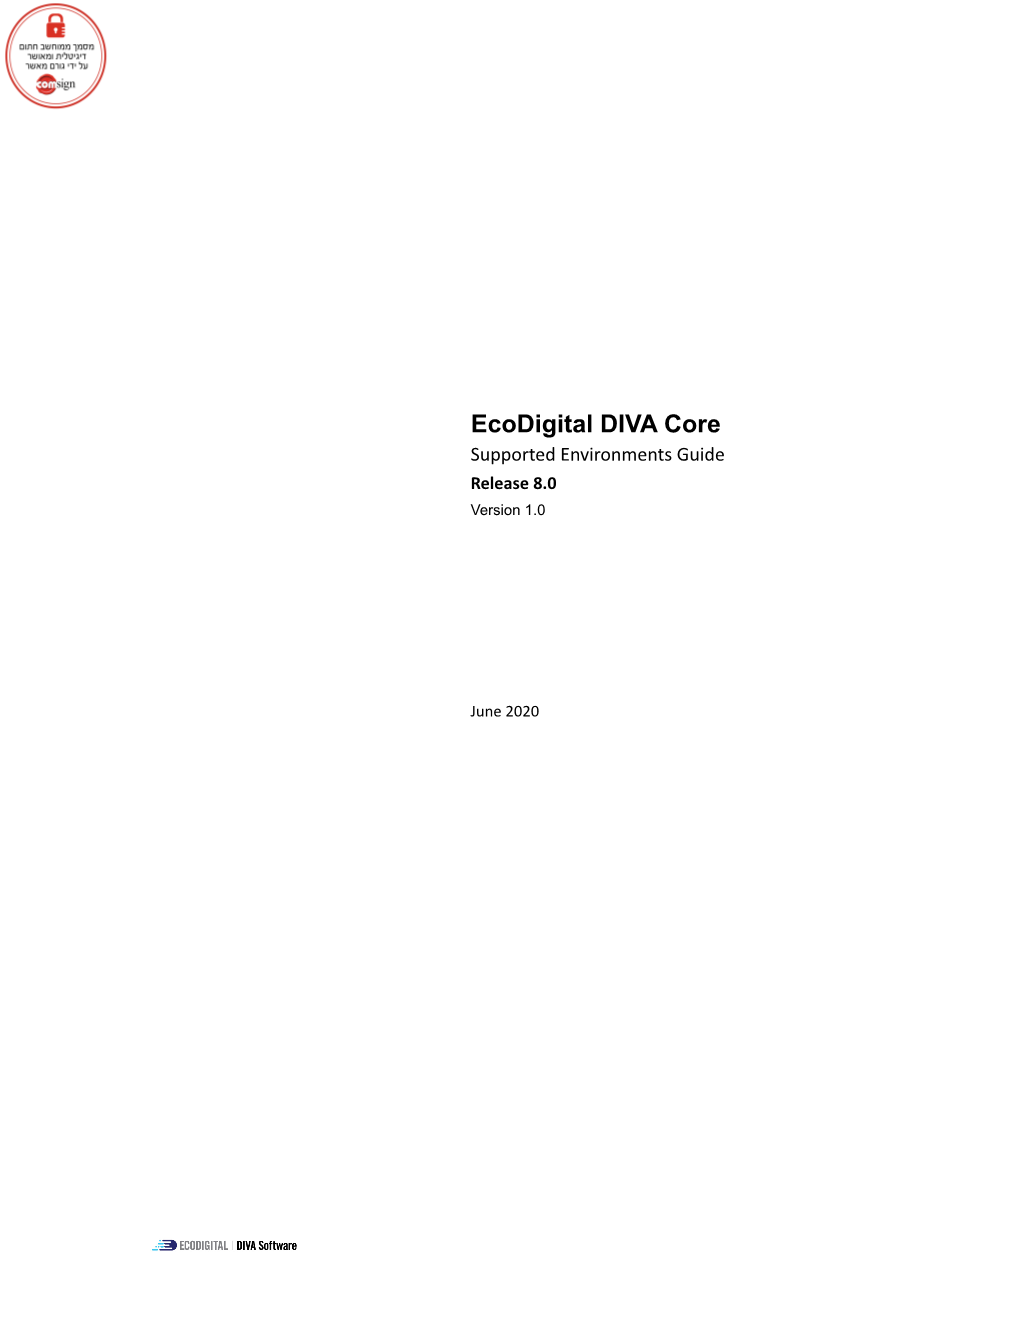 Ecodigital DIVA Core Supported Environments Guide Release 8.0 Version 1.0